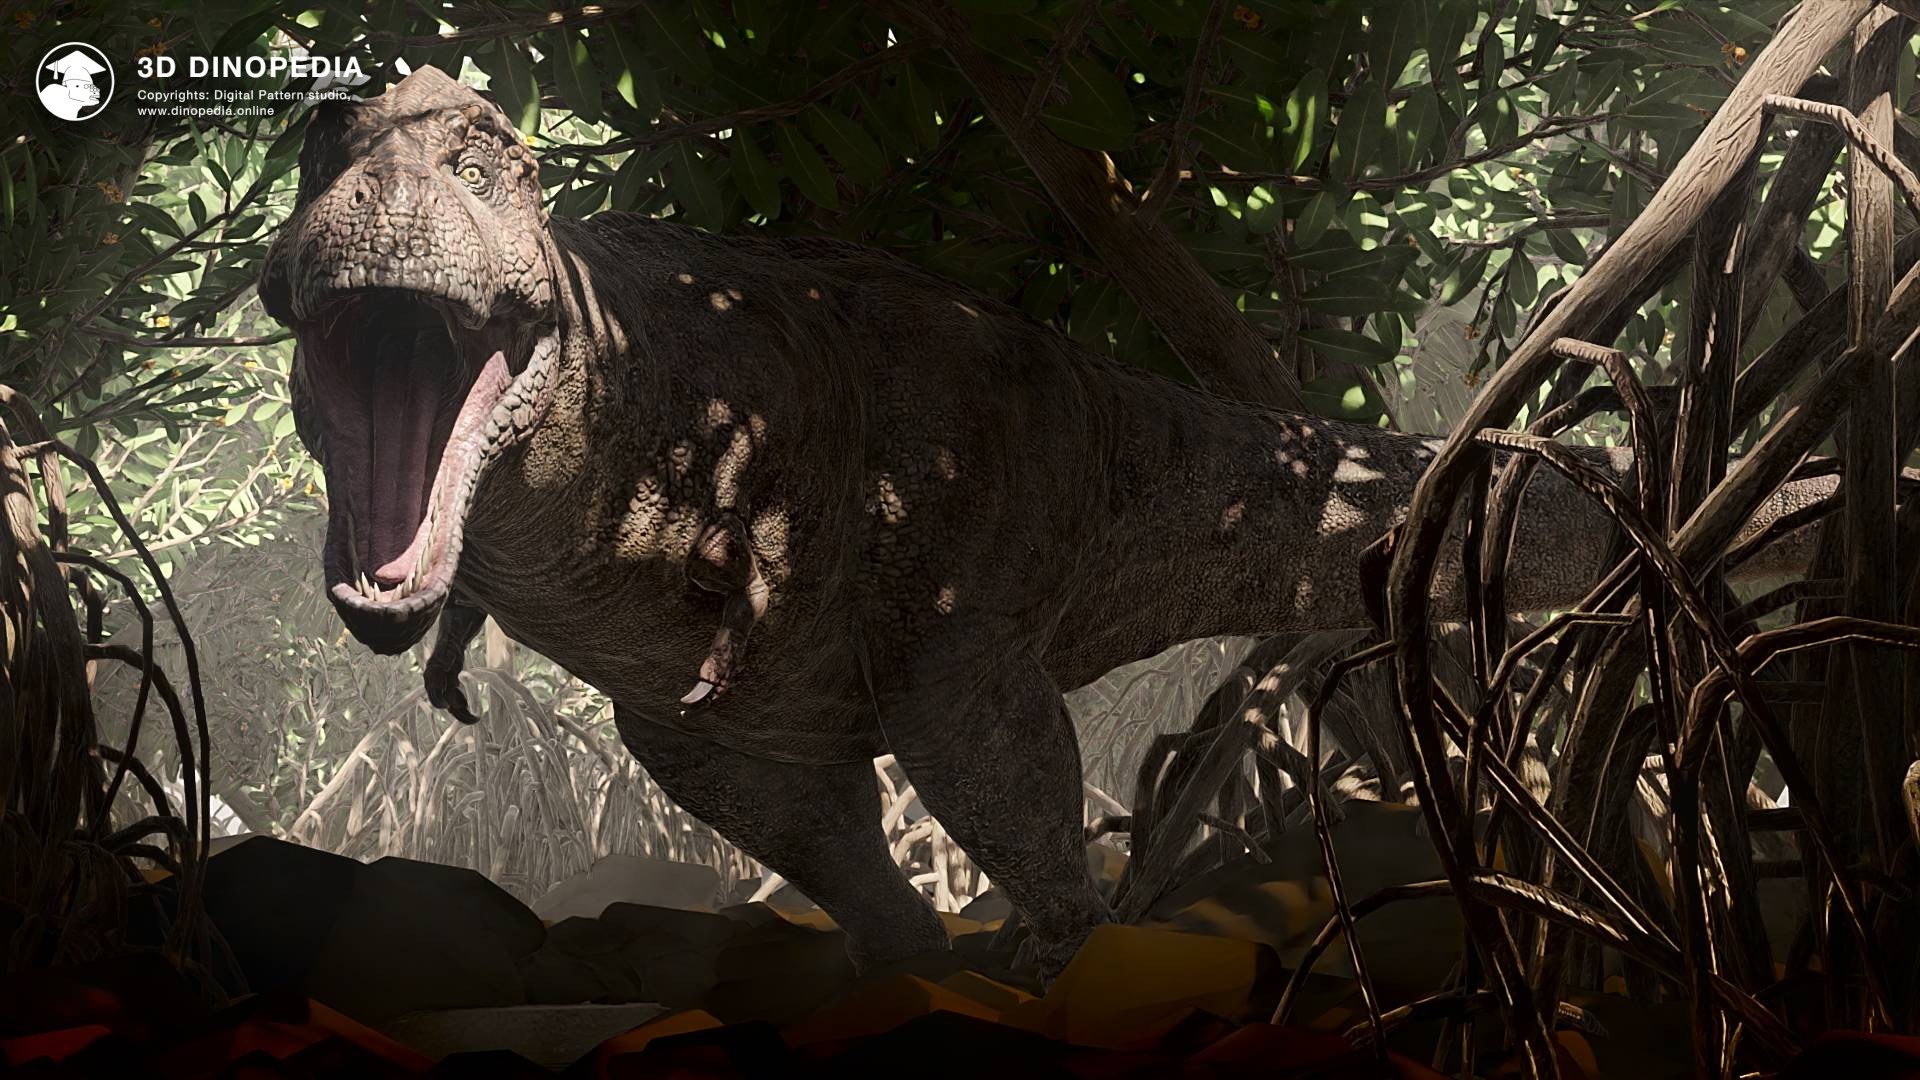 3D Dinopedia Dinosaurs on Screen: The Most Famous Films About Ancient Giants